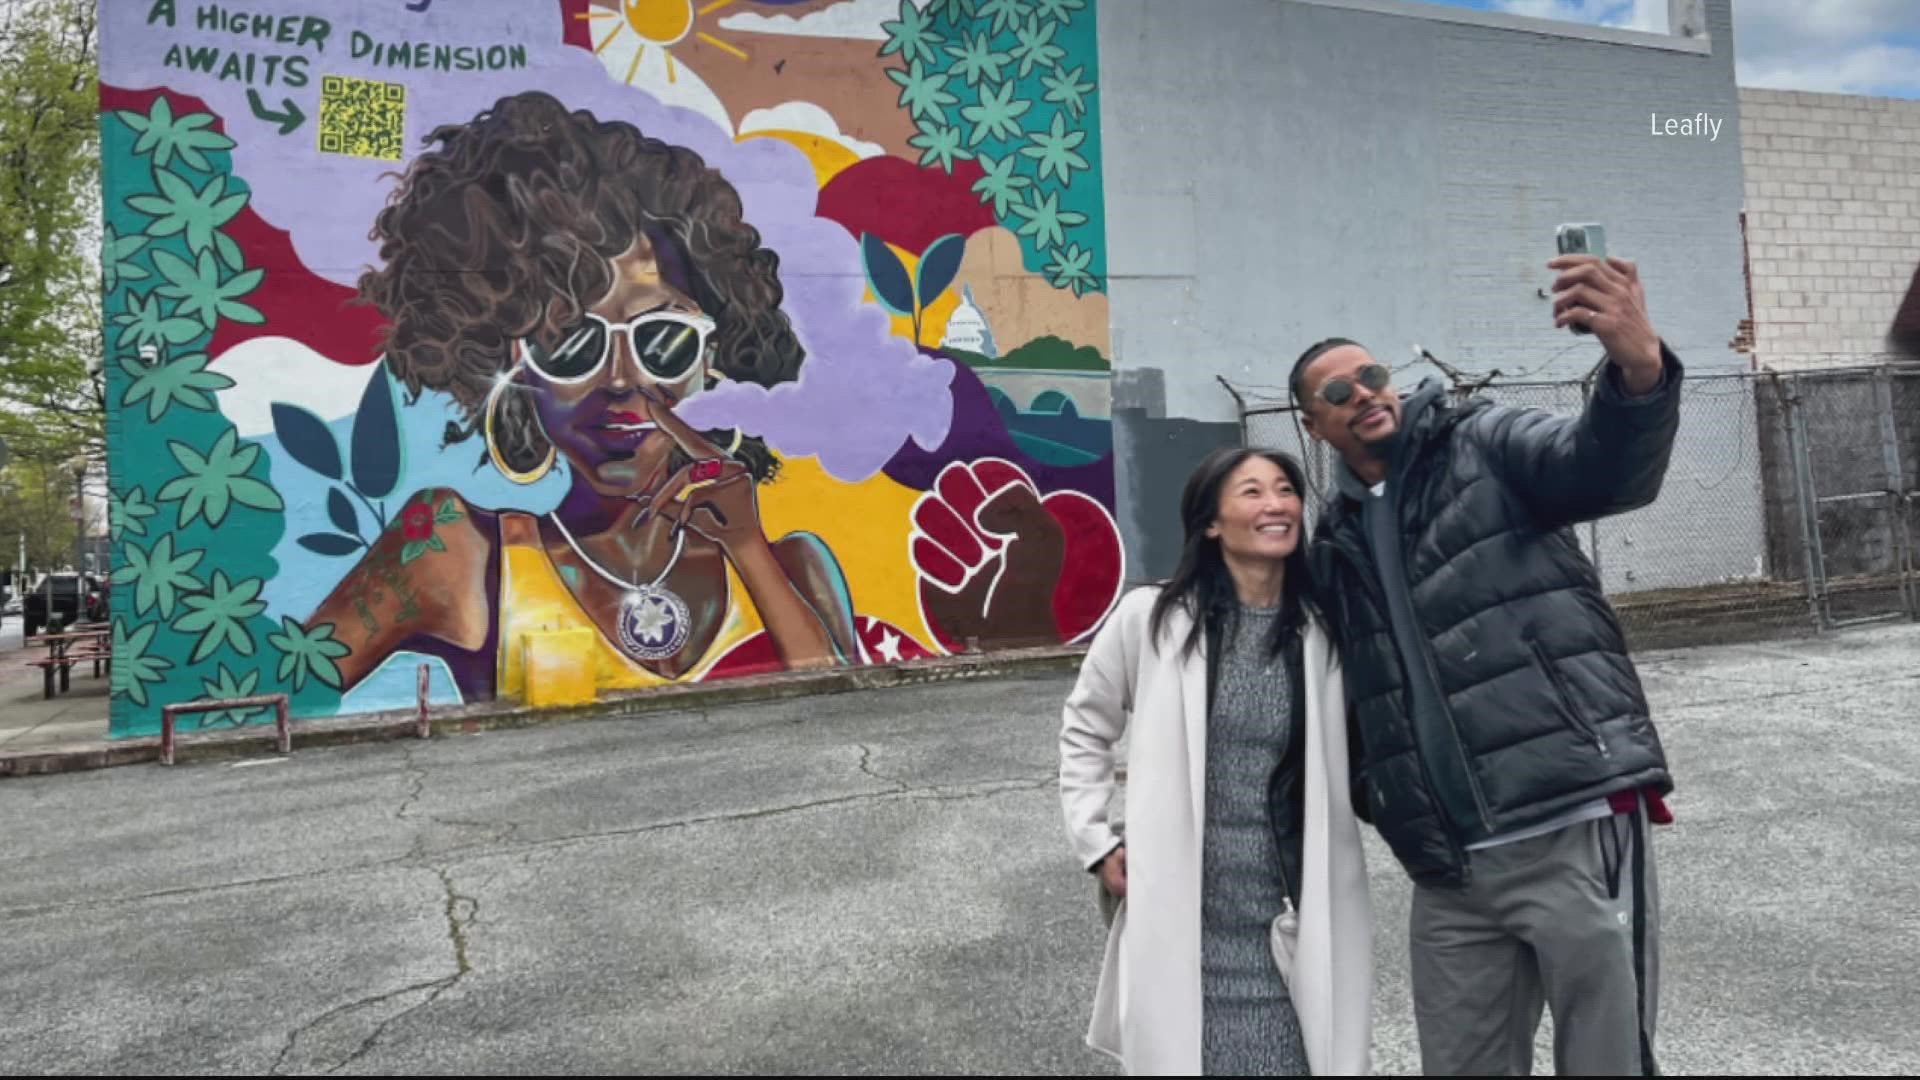 The mural is on Georgia Ave, NW and was created by a Howard alum.